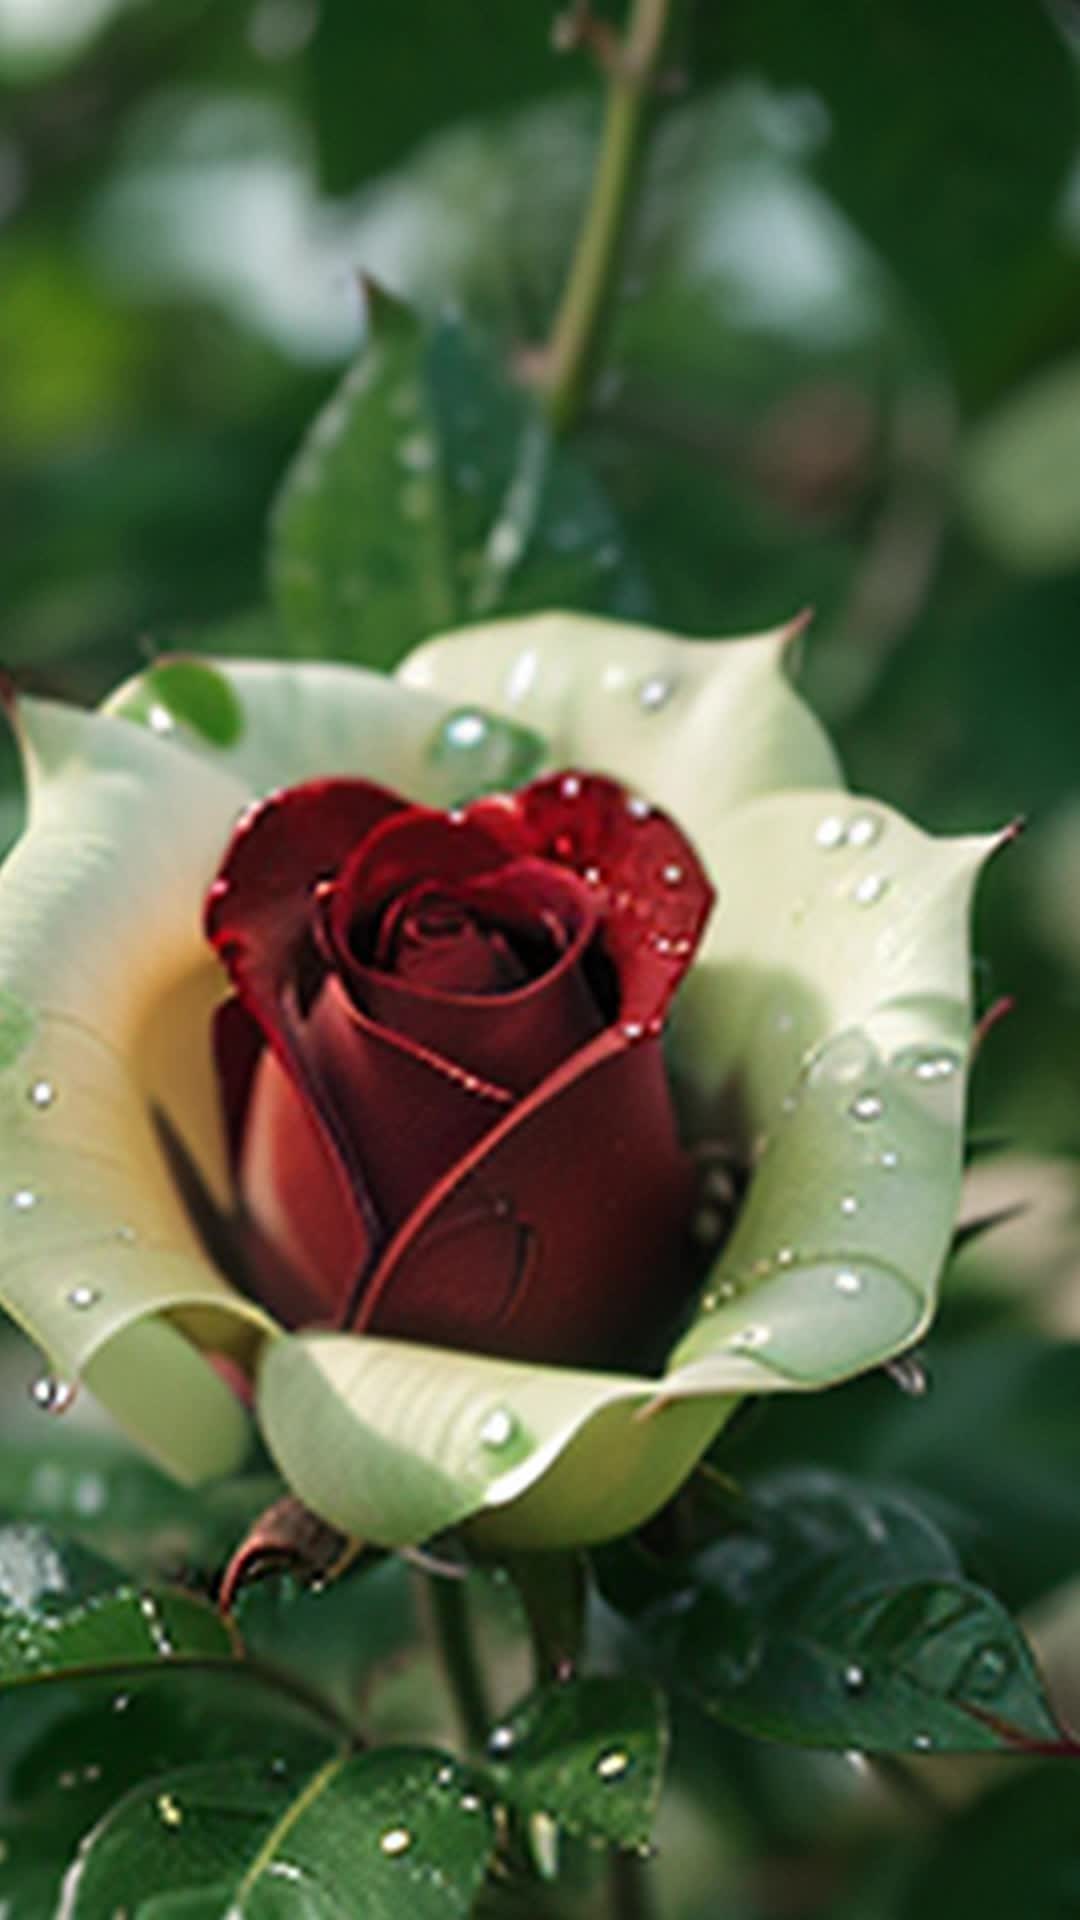 a red velvet rose with white veins and drops of morning dew on green leaves and a long trunk, slowly opening its bud